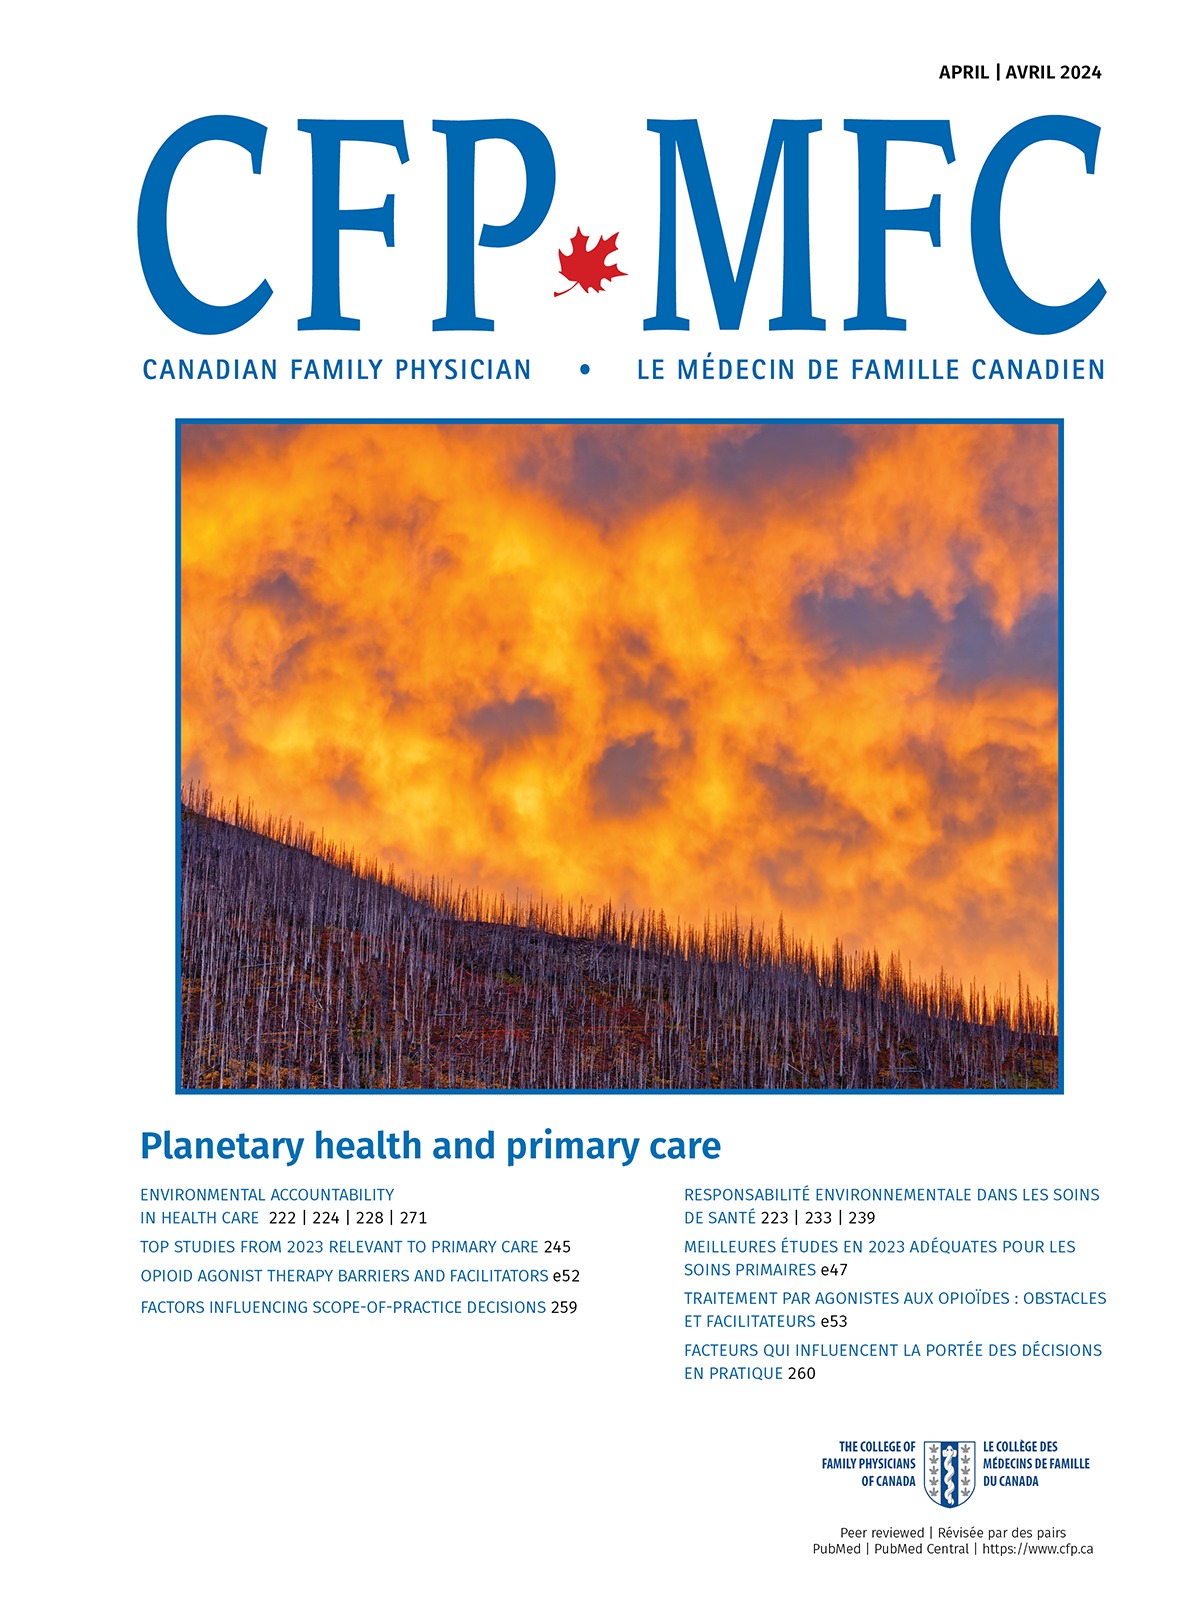 Planetary health lens for primary care: Considering environmental sustainability offers benefits to patients and to providers